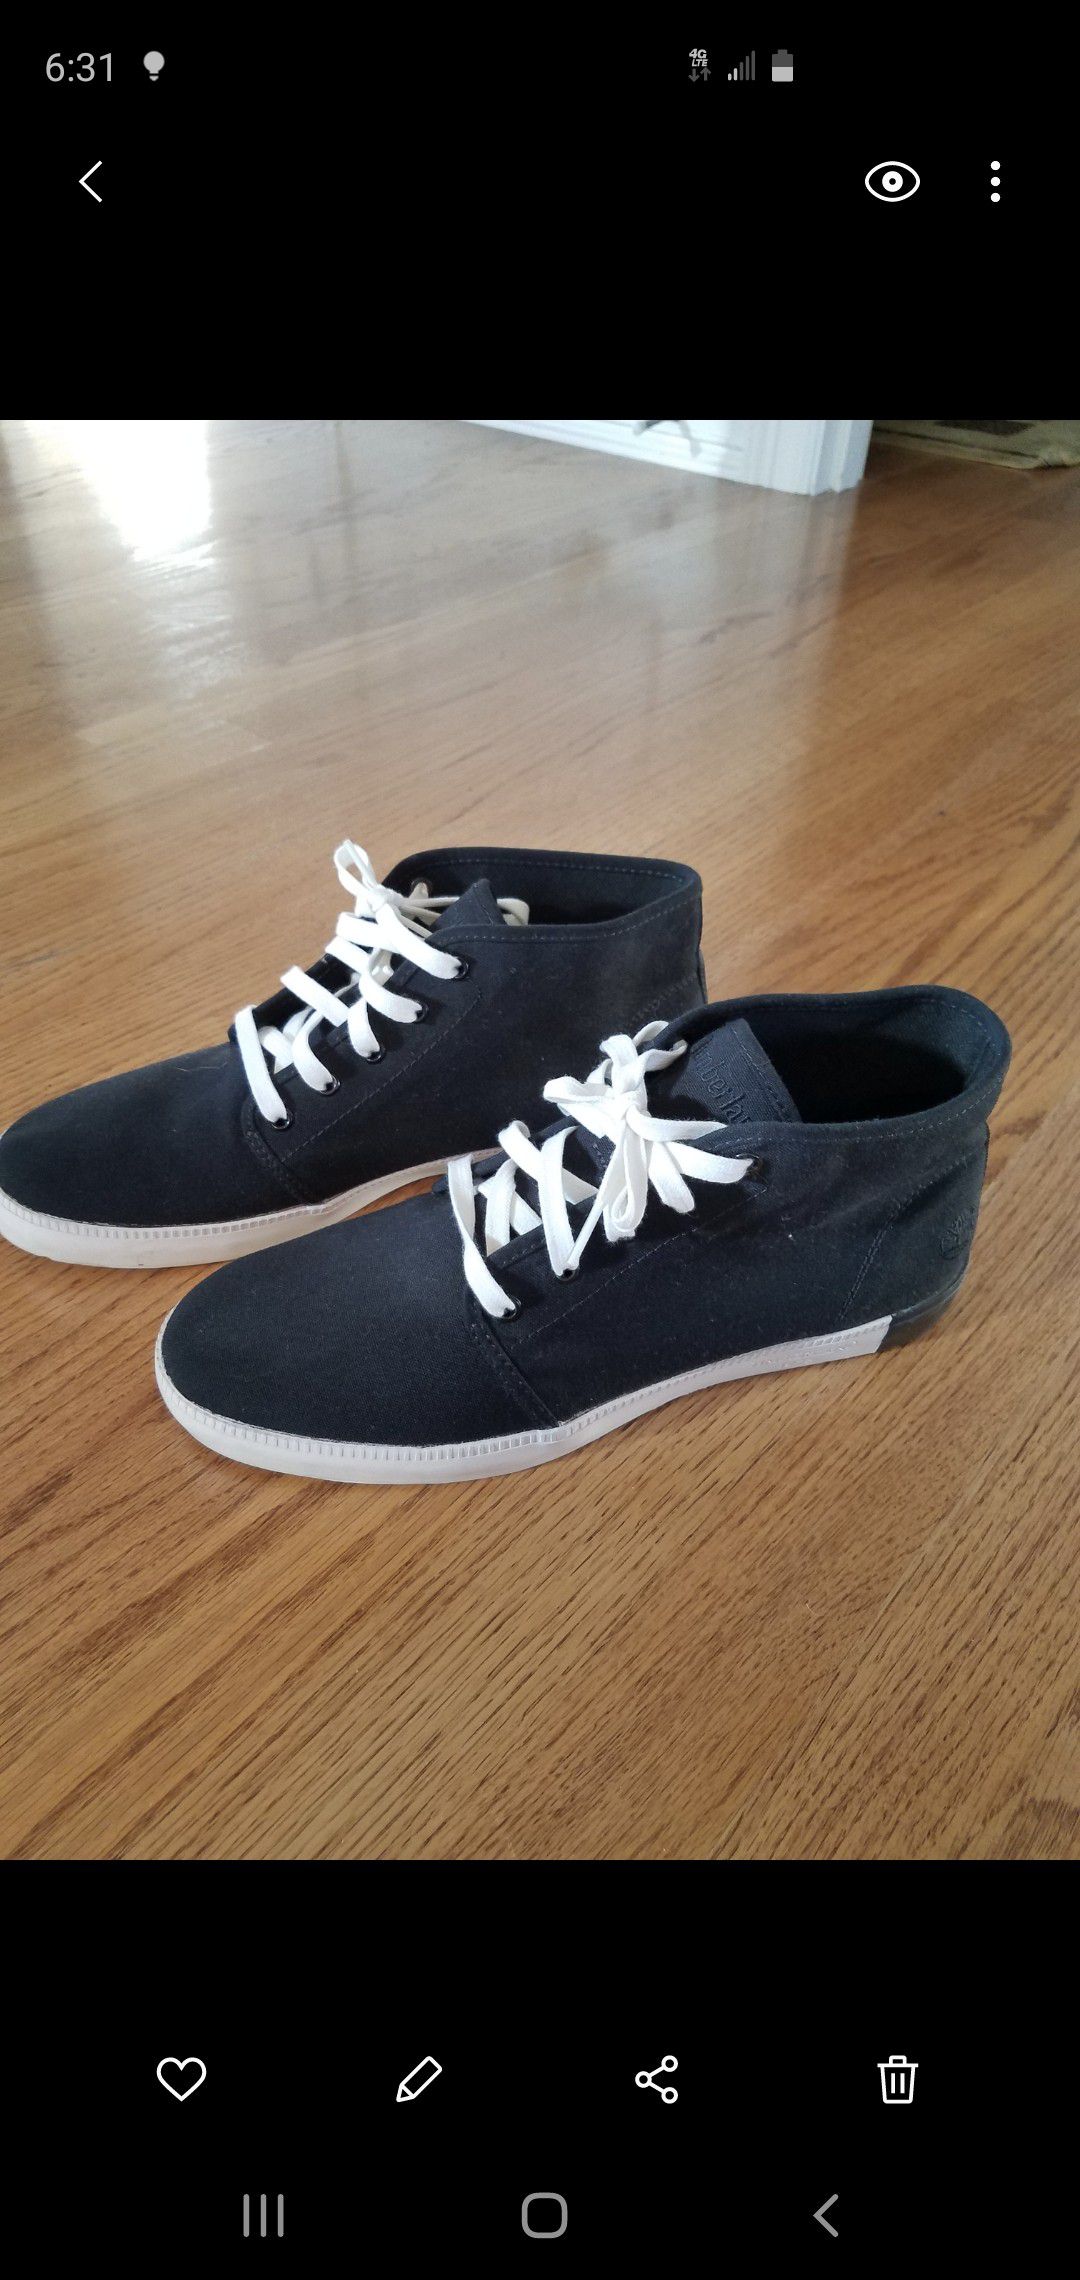 Black timberland casual canvas shoes